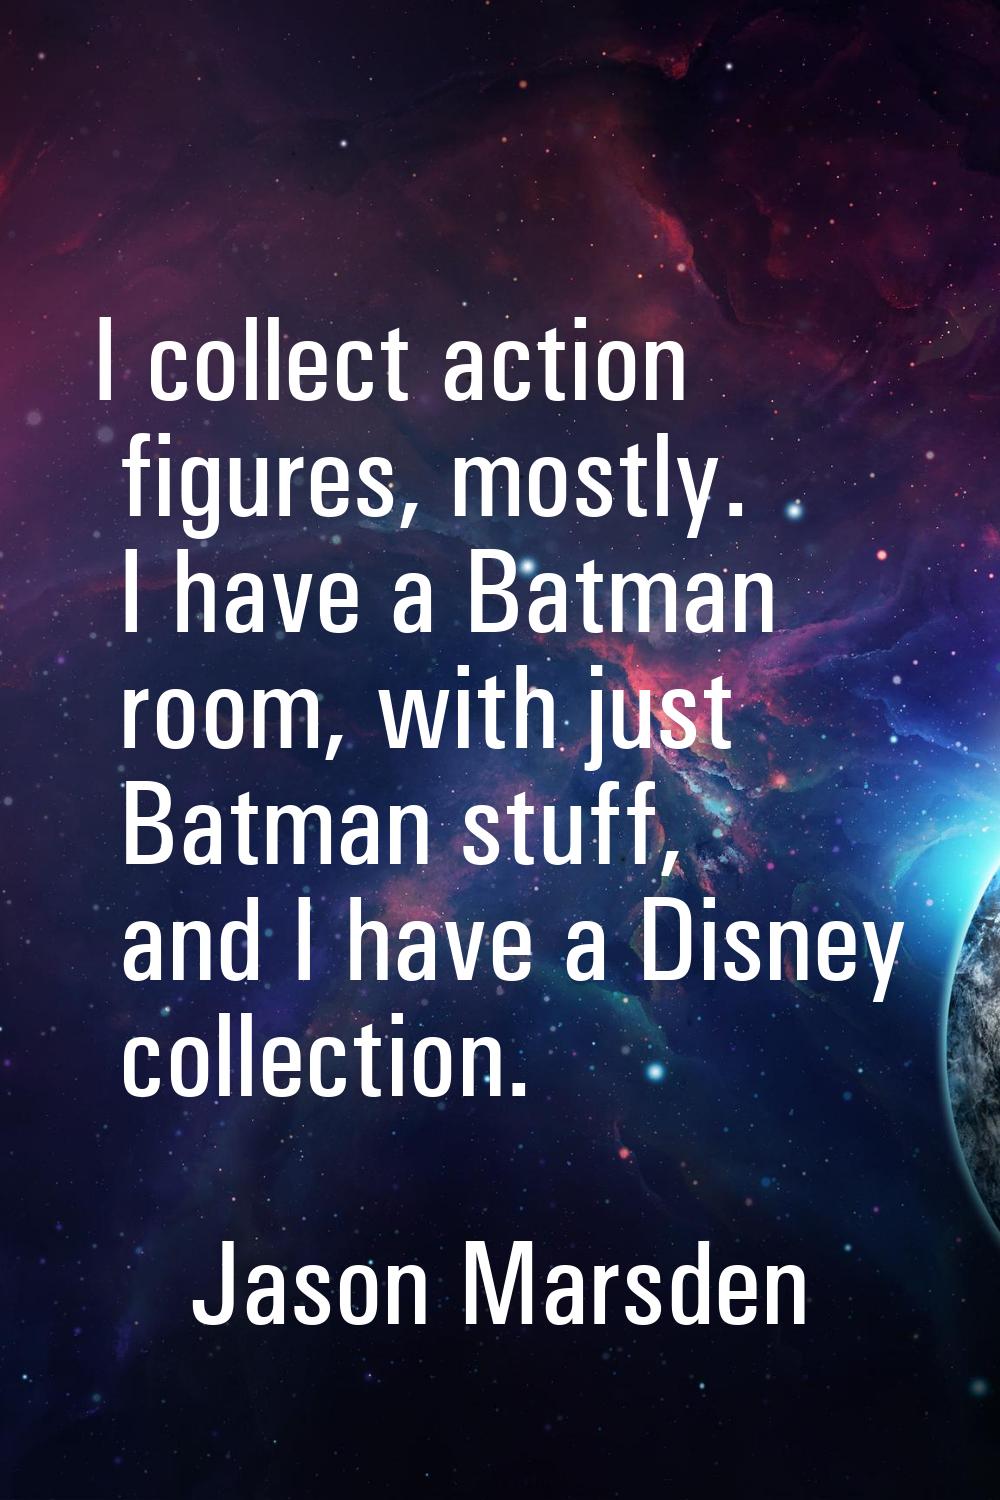 I collect action figures, mostly. I have a Batman room, with just Batman stuff, and I have a Disney